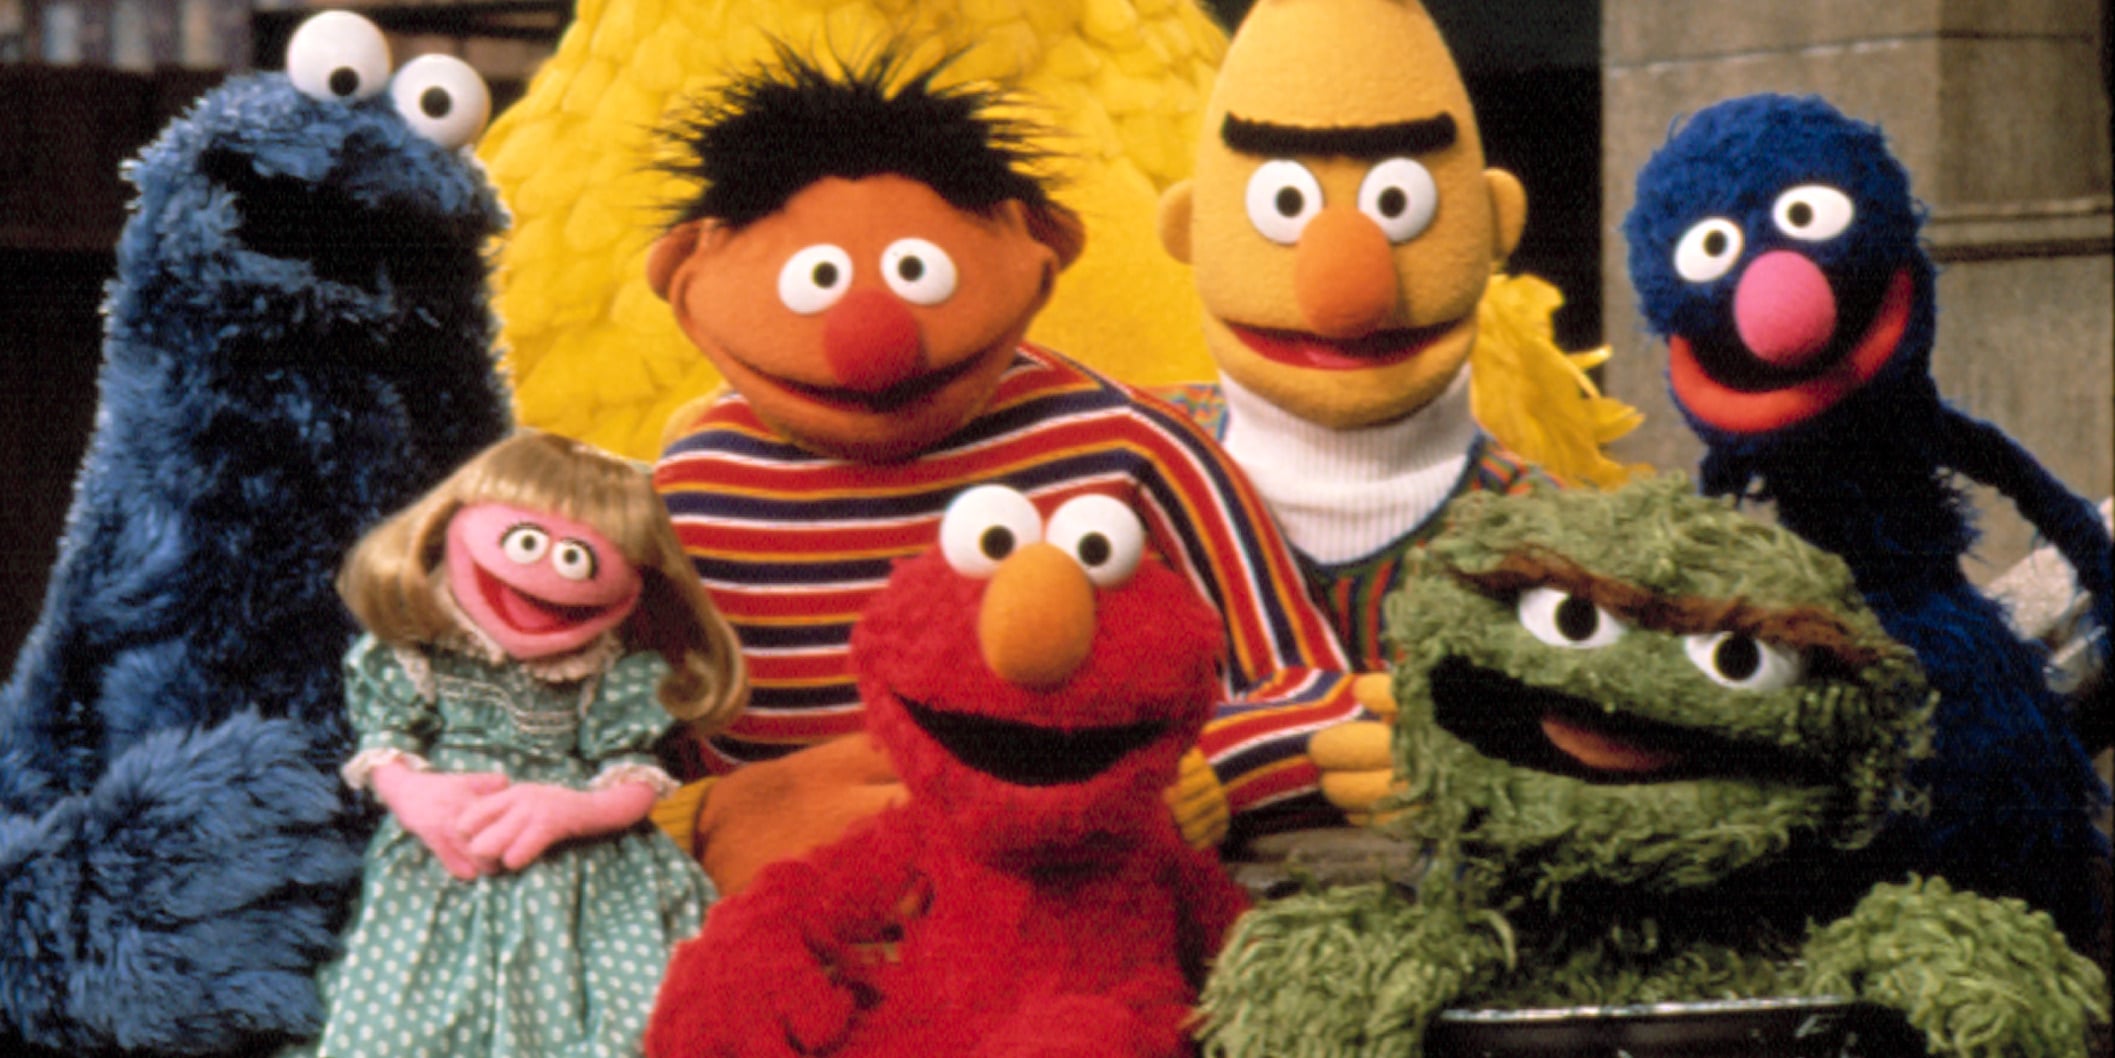 Why I Loved Sesame Street as a Child